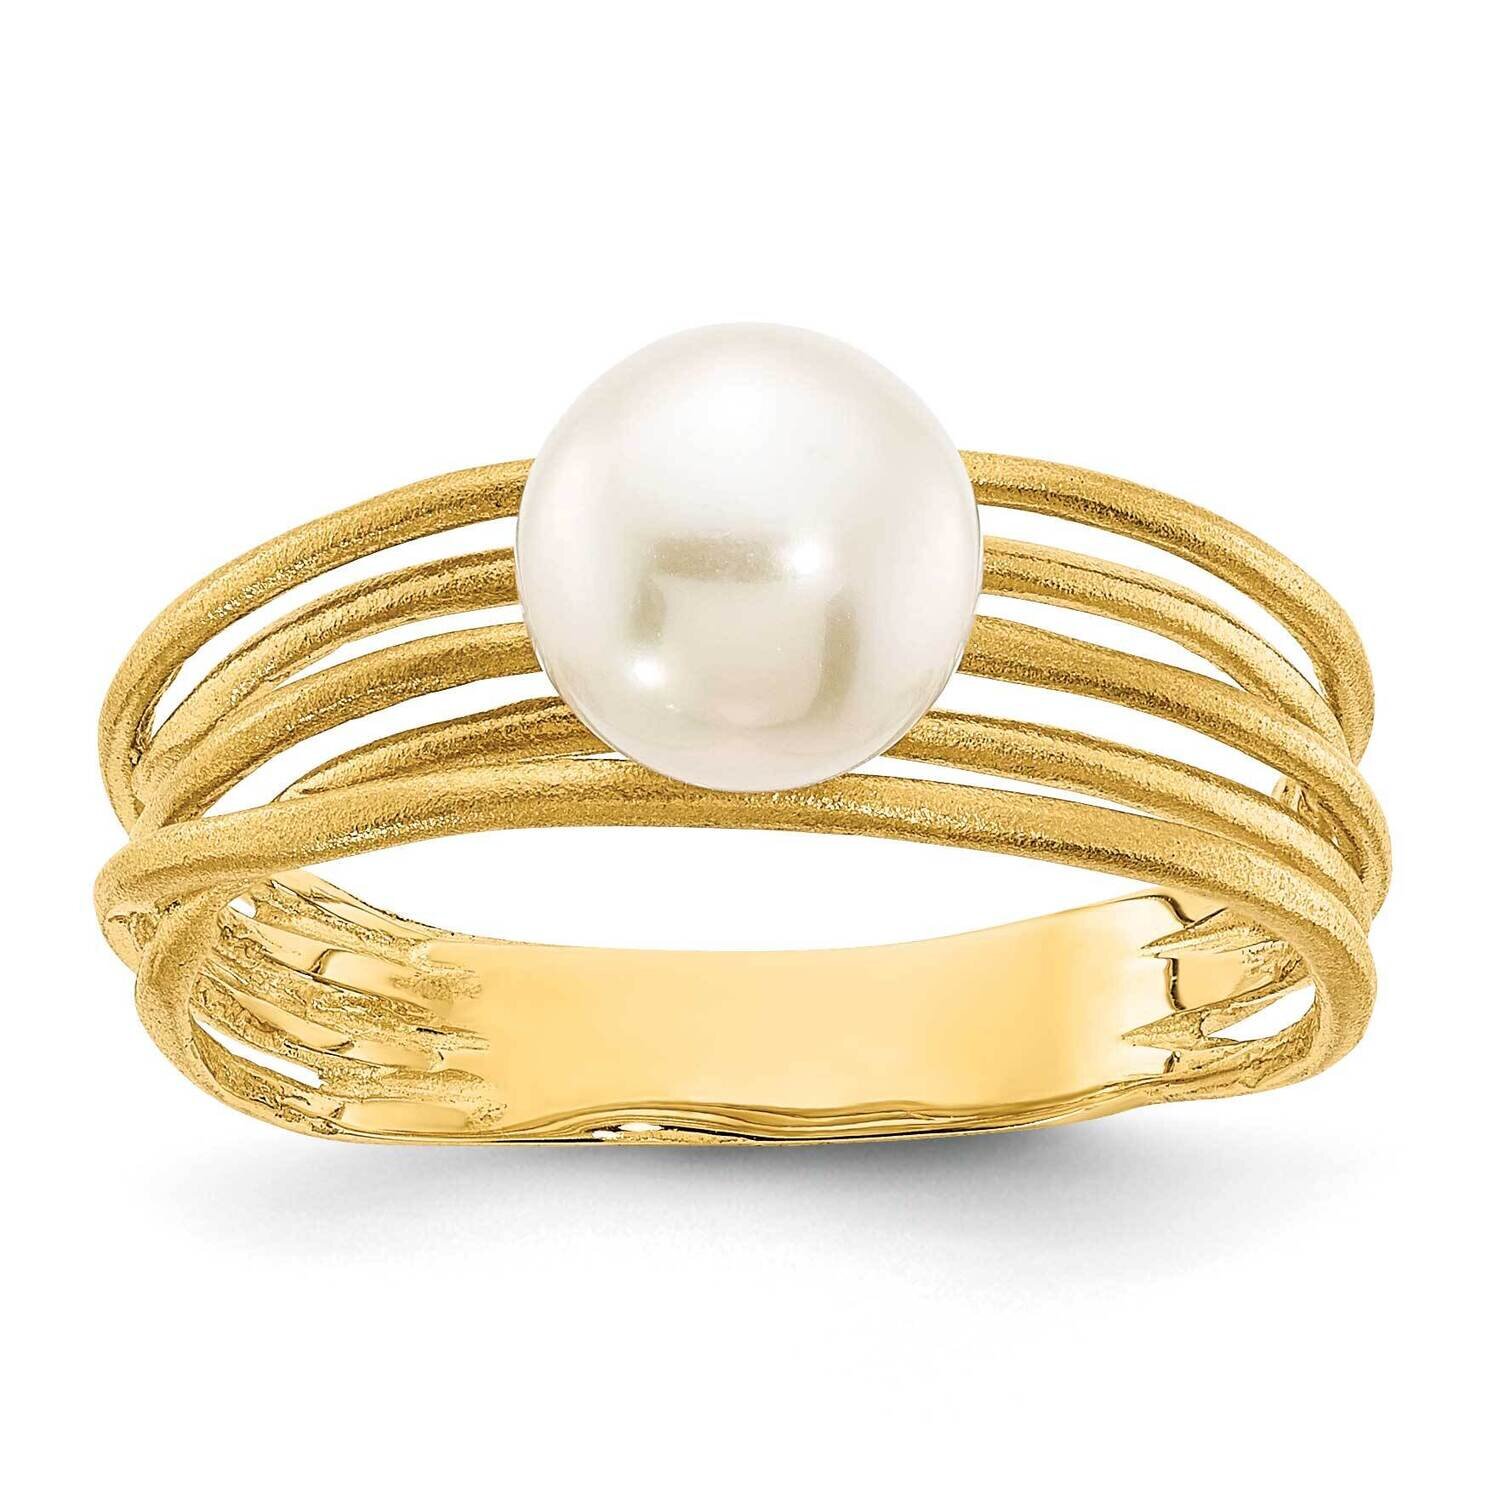 7-8mm Round White Freshwater Cultured Pearl Brushed Ring 14k Gold Y13946PL